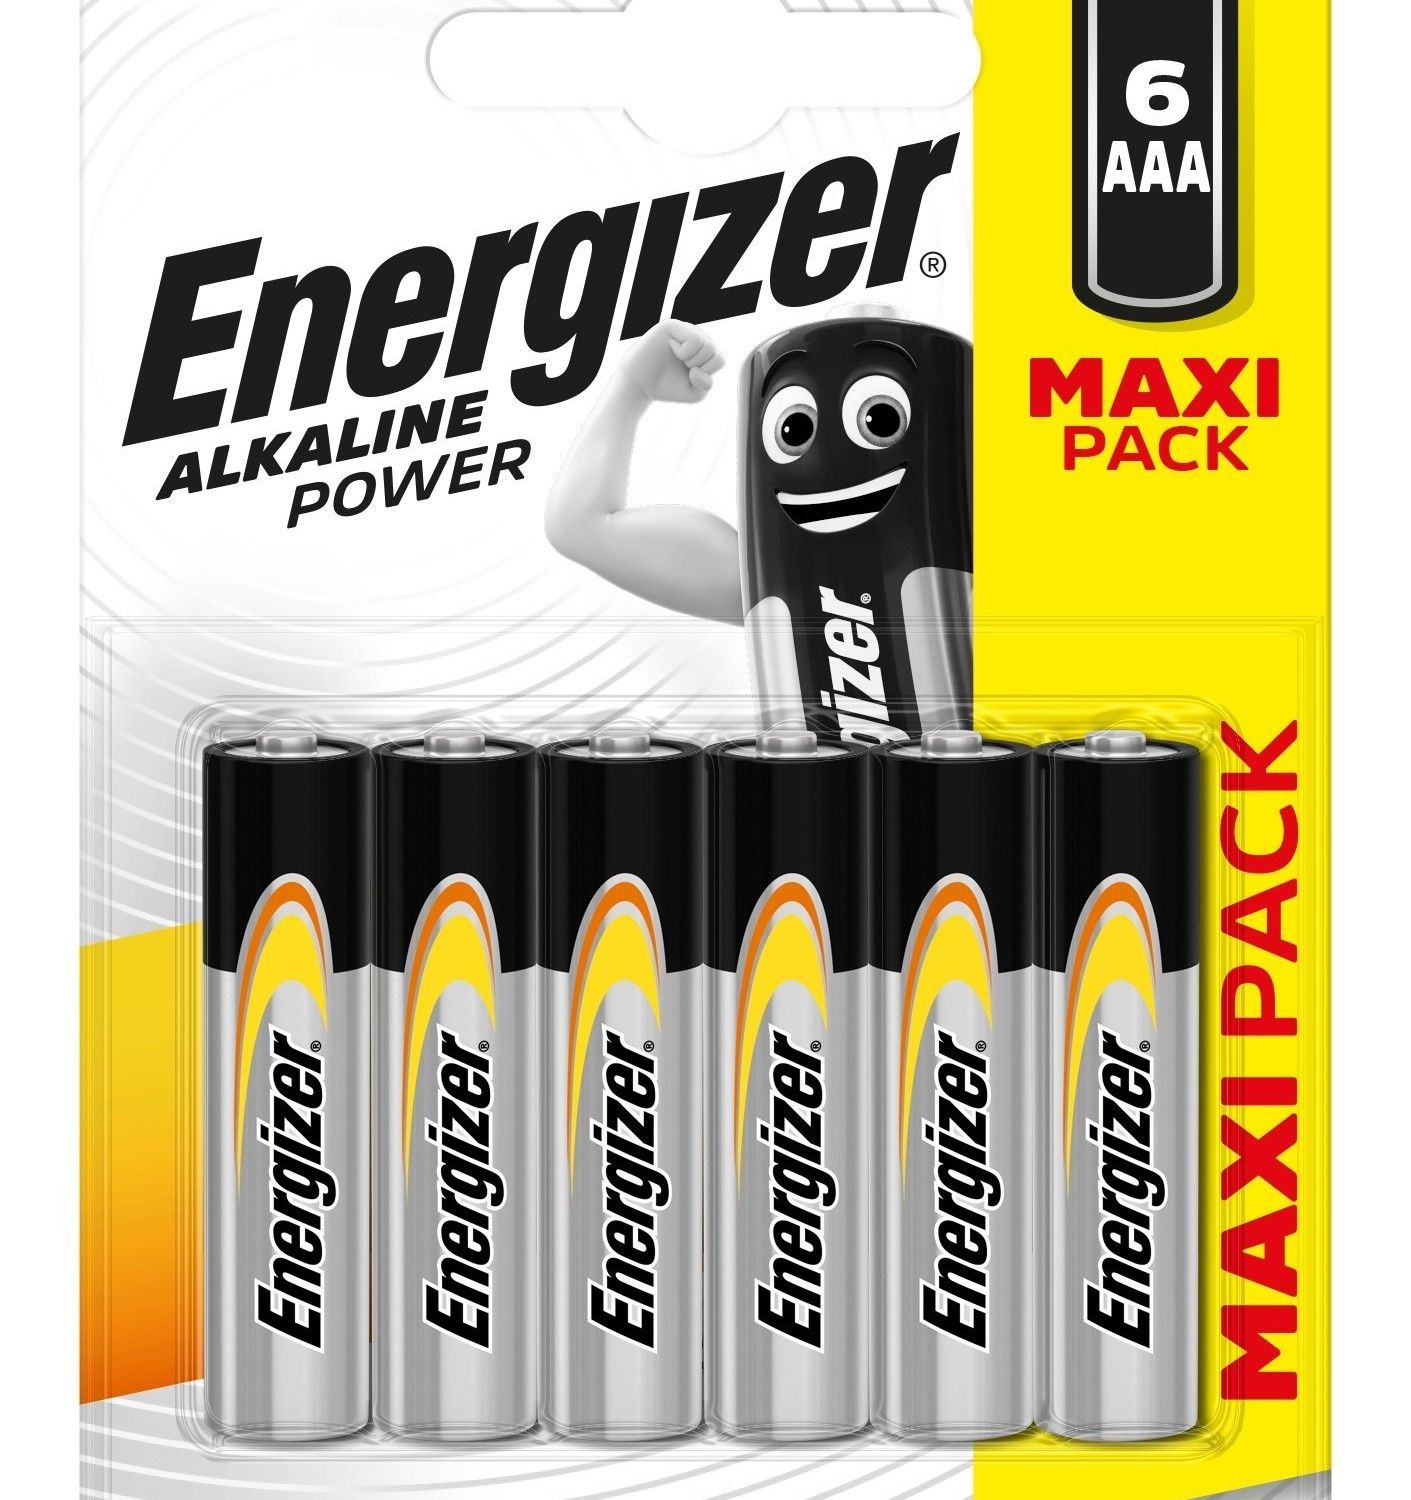 ENERGIZER Power - 6 piles alcalines - AAA LR03